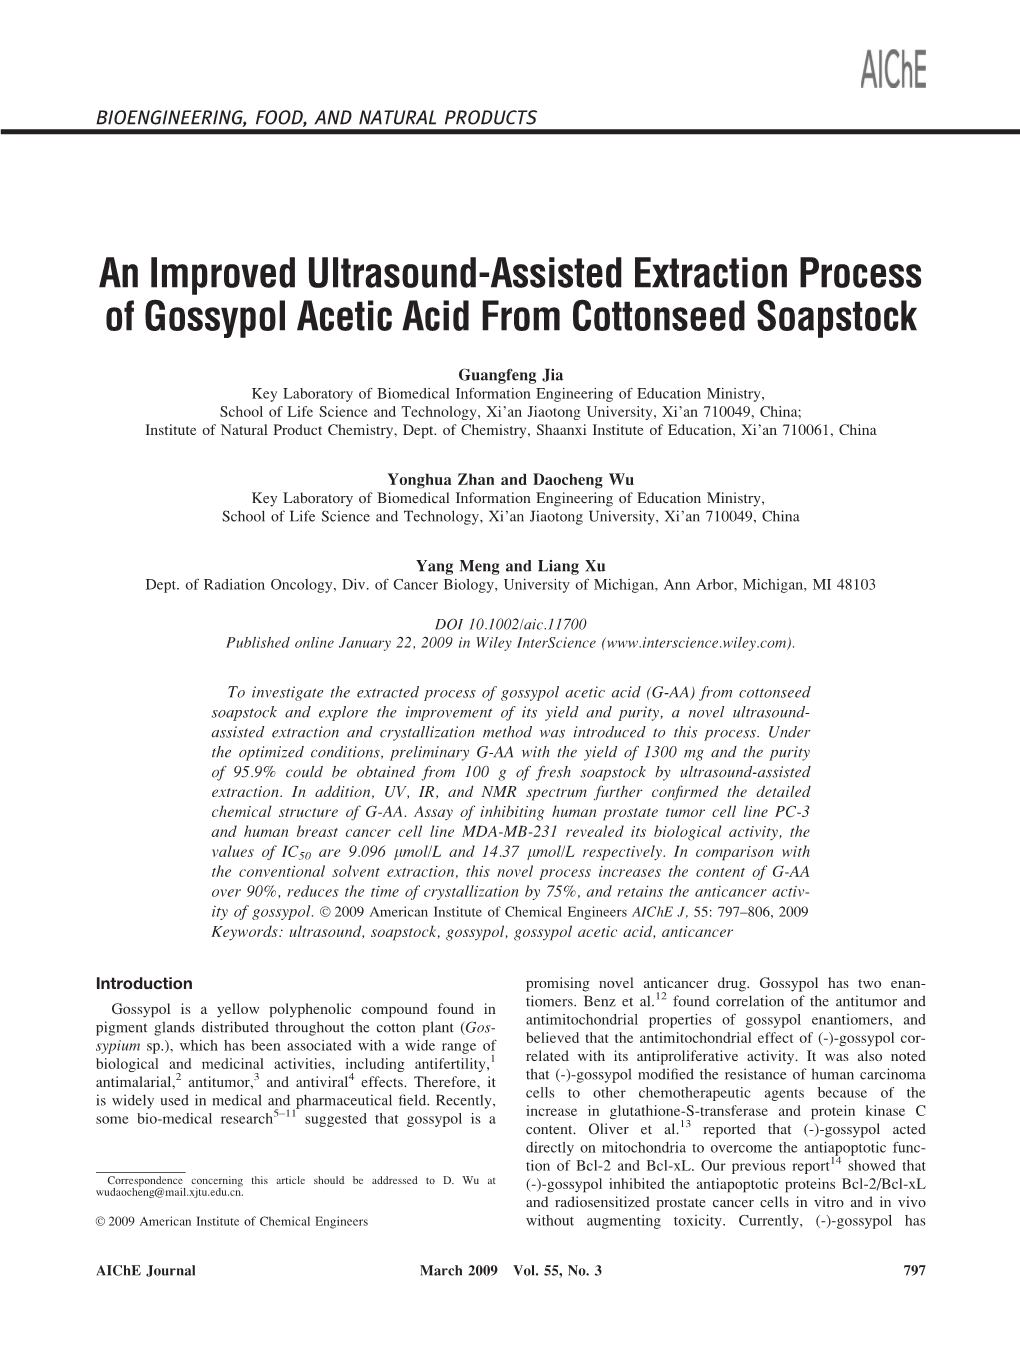 An Improved Ultrasound-Assisted Extraction Process of Gossypol Acetic Acid from Cottonseed Soapstock